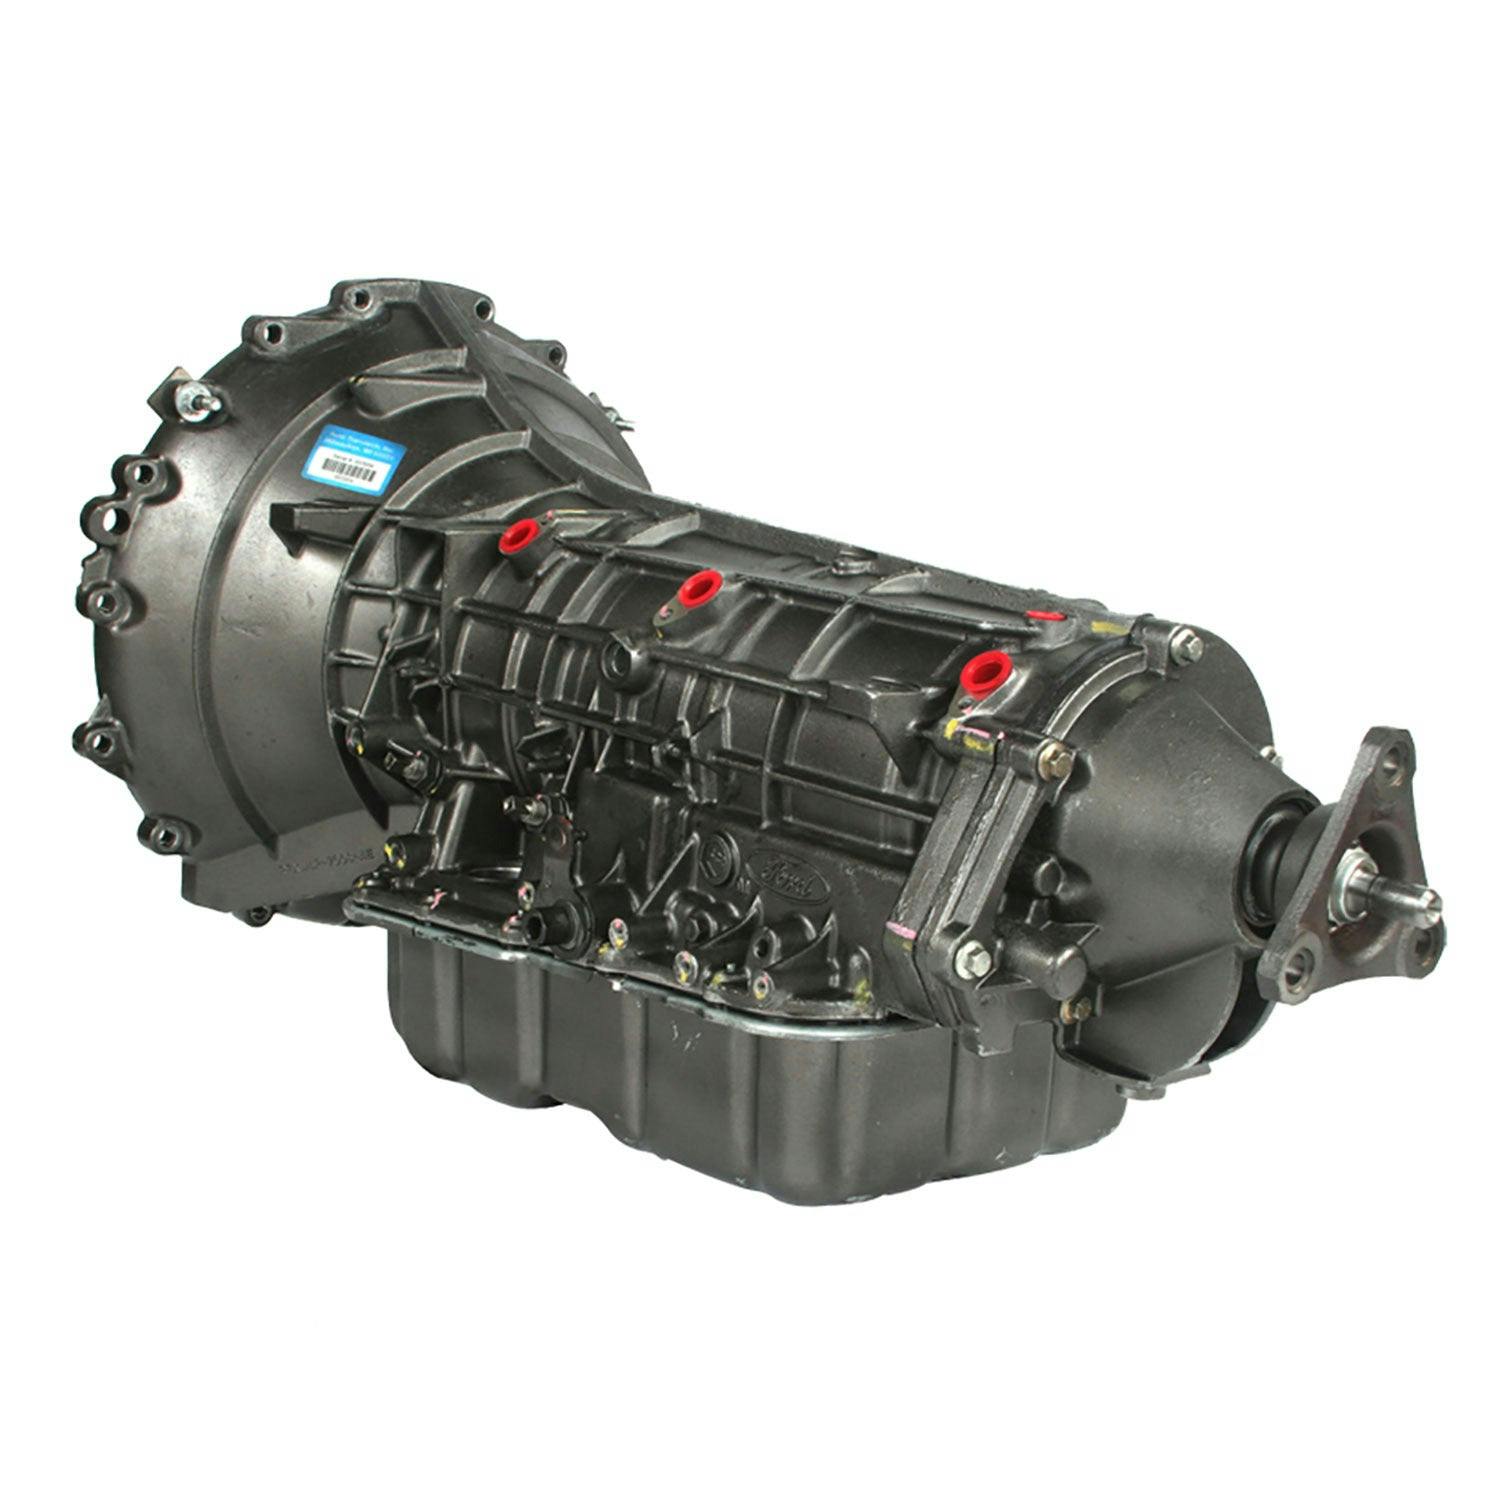 Automatic Transmission for 2002 Ford Explorer/Mercury Mountaineer RWD with 4.6L V8 Engine